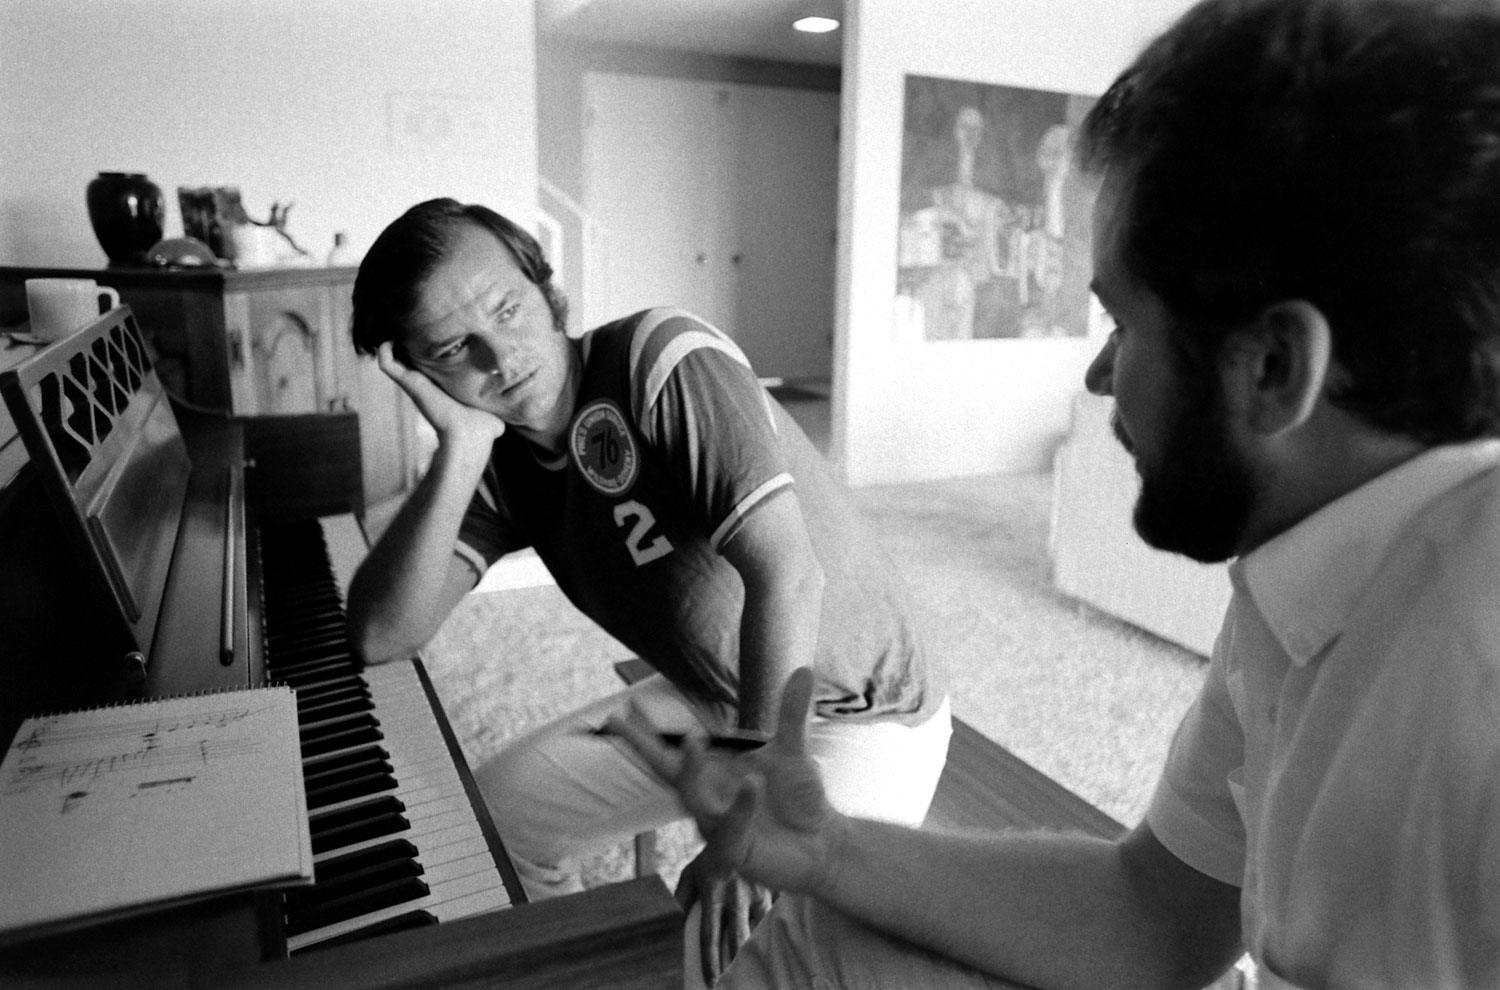 Jack Nicholson at home in 1969, taking his first piano lesson with teacher Josef Pacholczyk, prior to starring as a classical pianist-turned-roughneck in the 1970 classic, Five Easy Pieces.